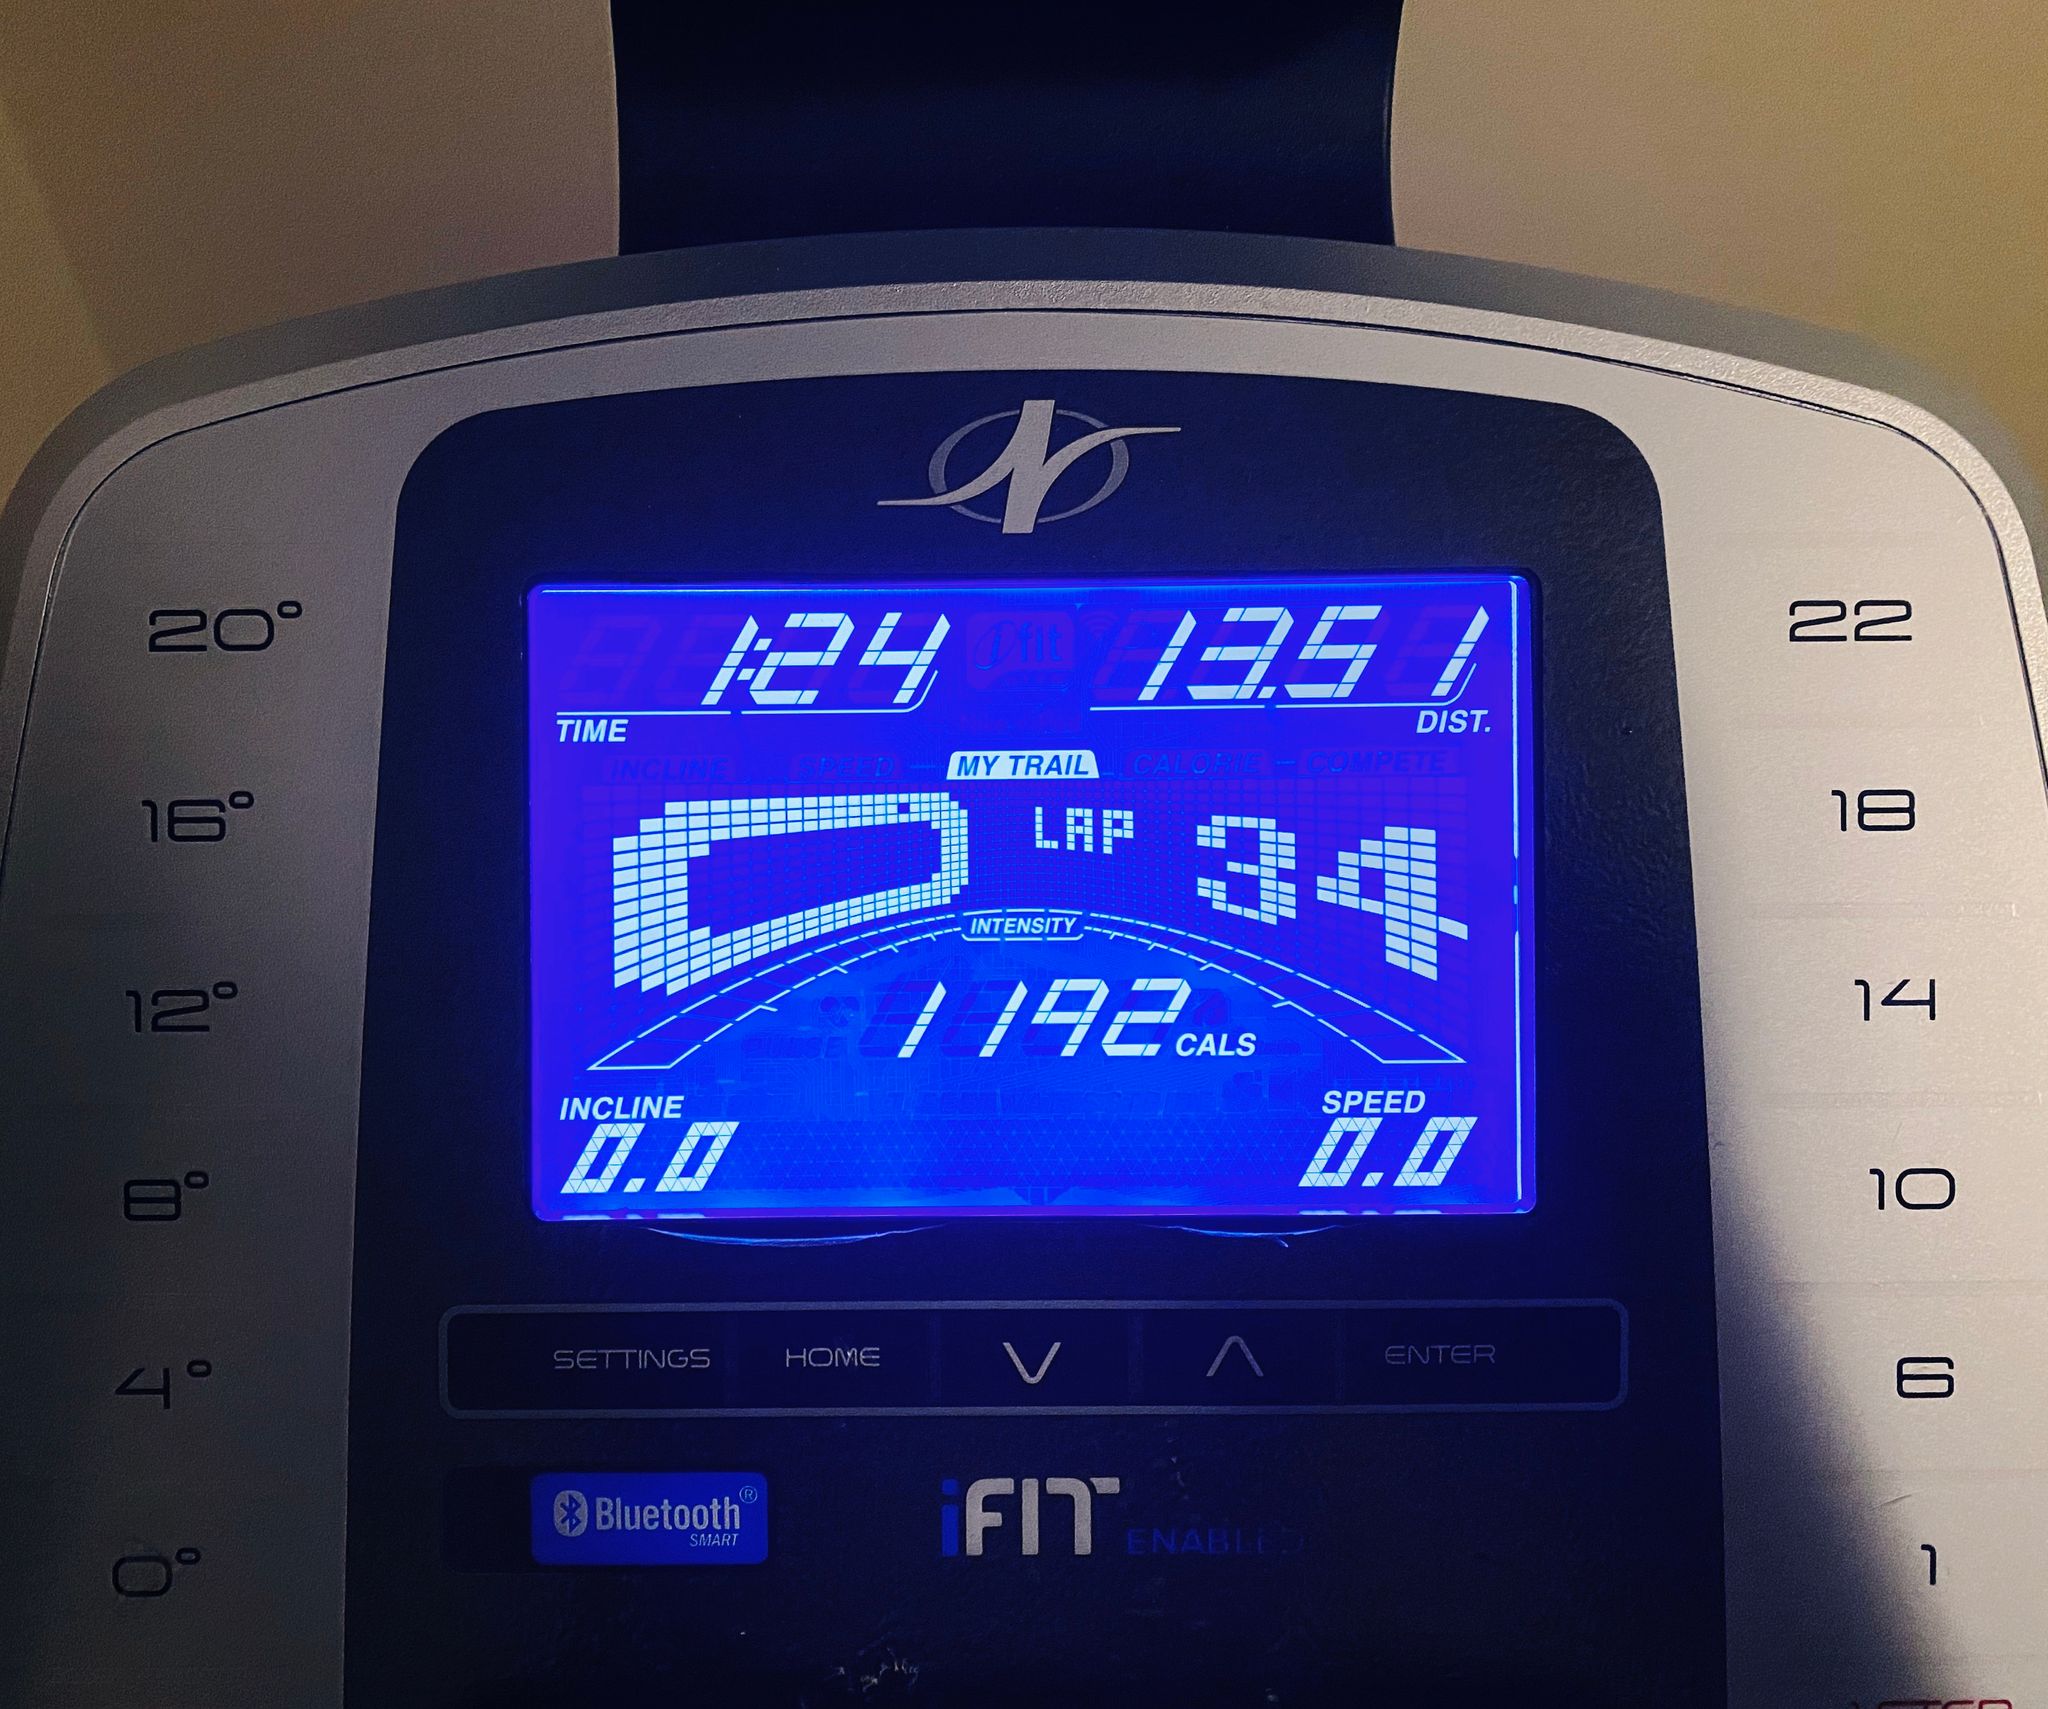 A photo of the display on our elliptical, showing 1192 calories burned and an hour twenty-four total workout time.